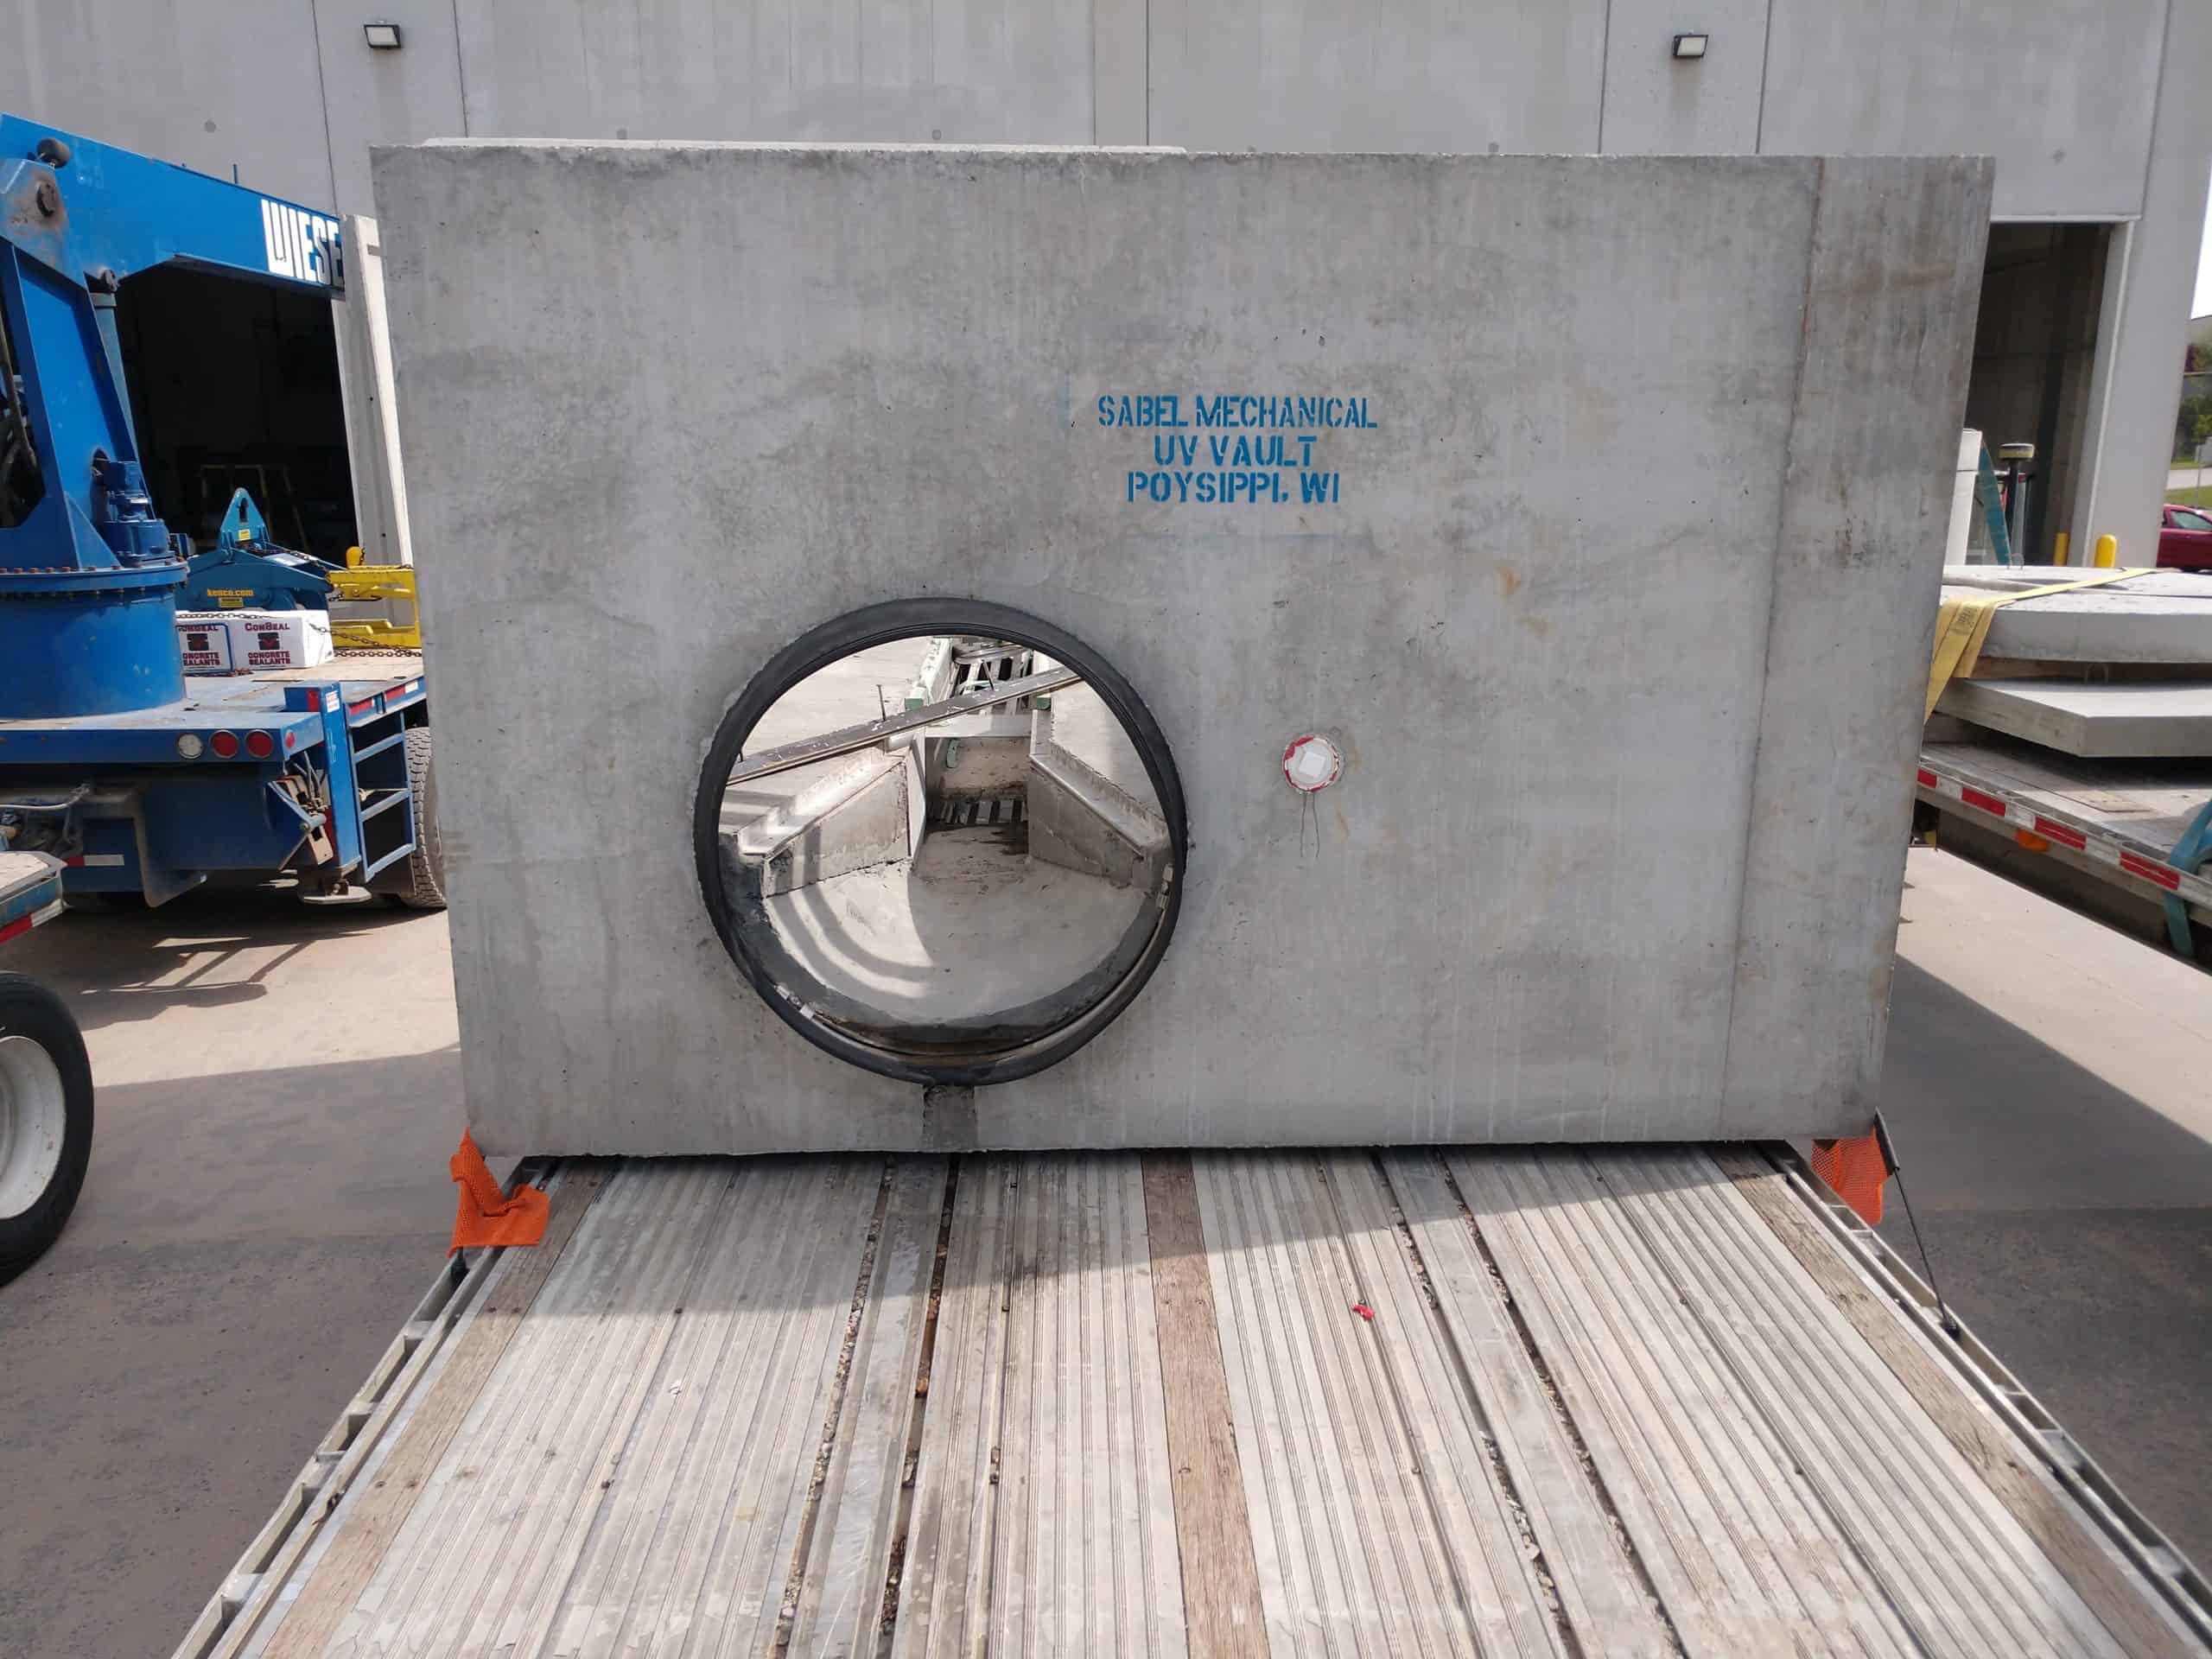 Poy Sippi UV Disinfection Vault by Wieser Concrete